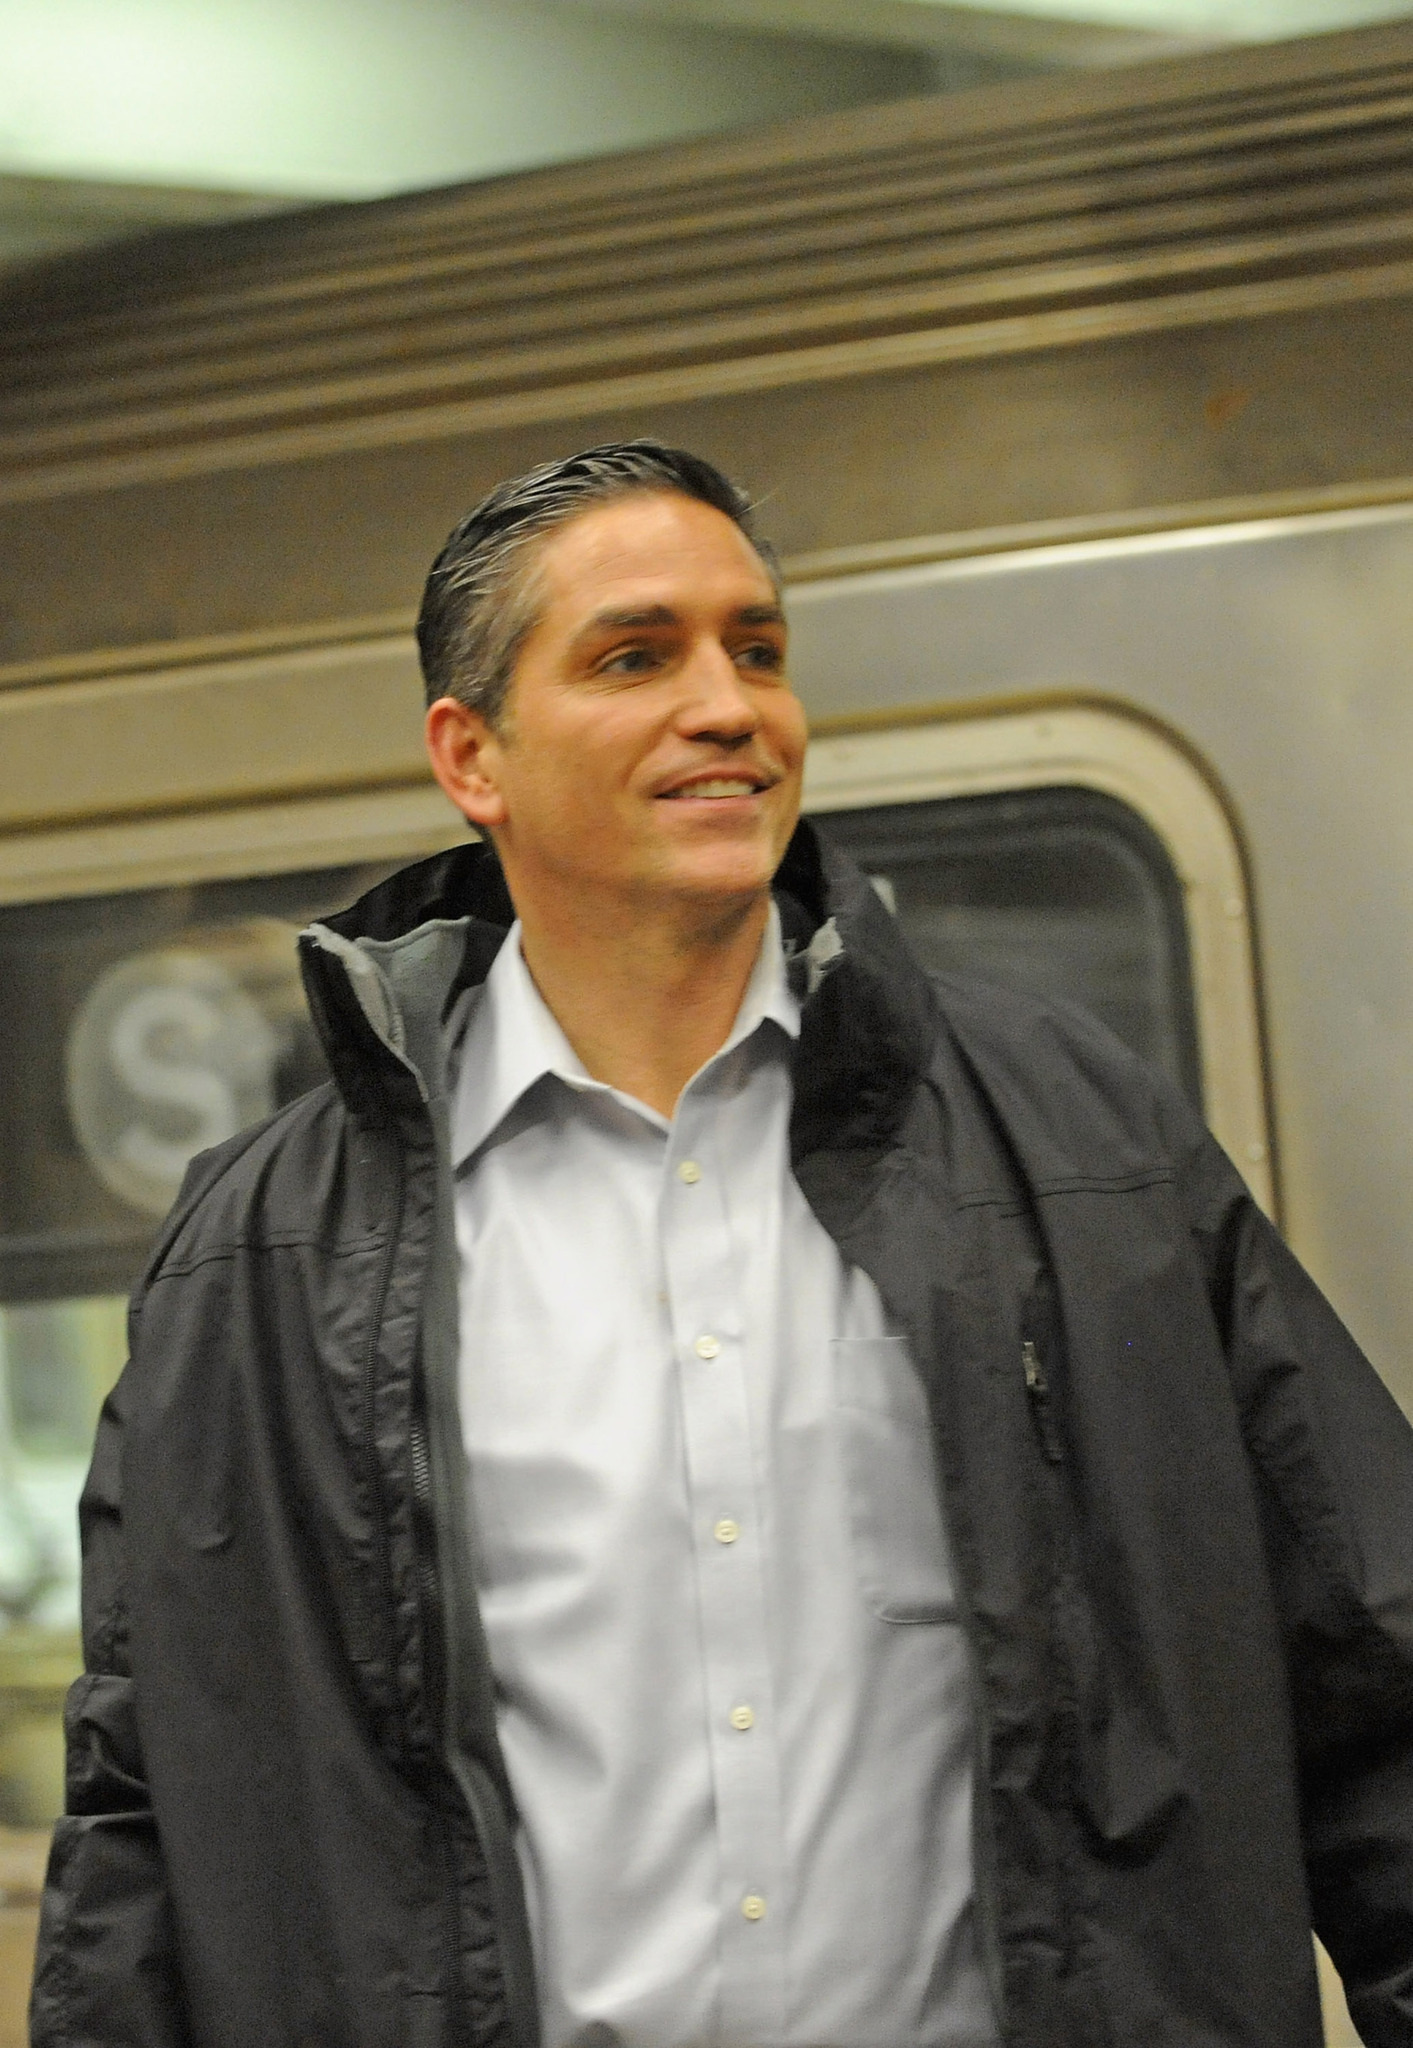 Jim Caviezel at event of Person of Interest (2011)